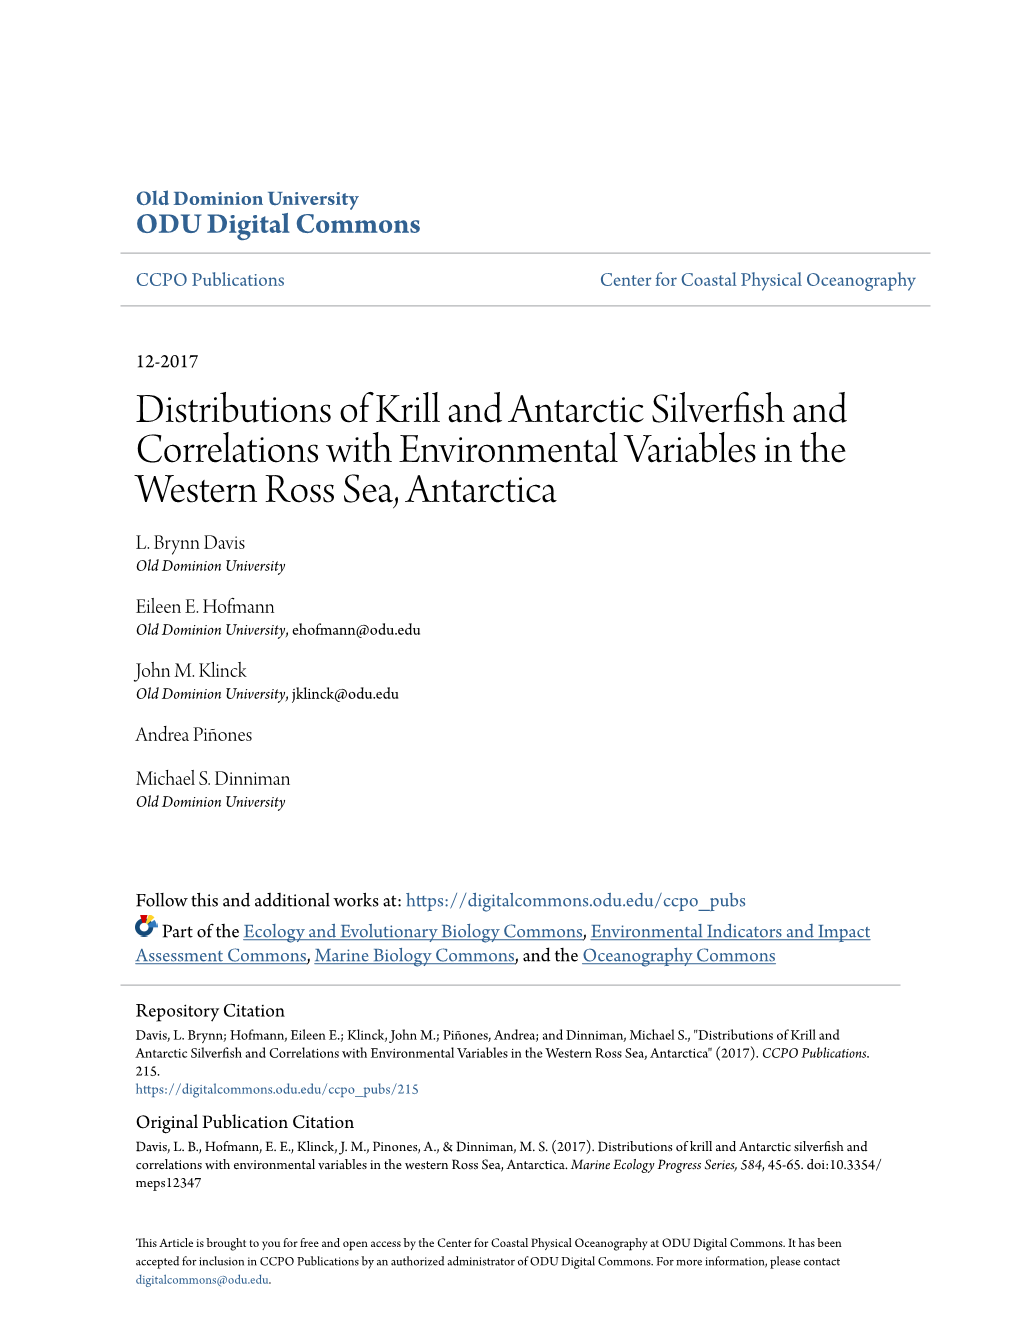 Distributions of Krill and Antarctic Silverfish and Correlations with Environmental Variables in the Western Ross Sea, Antarctica L